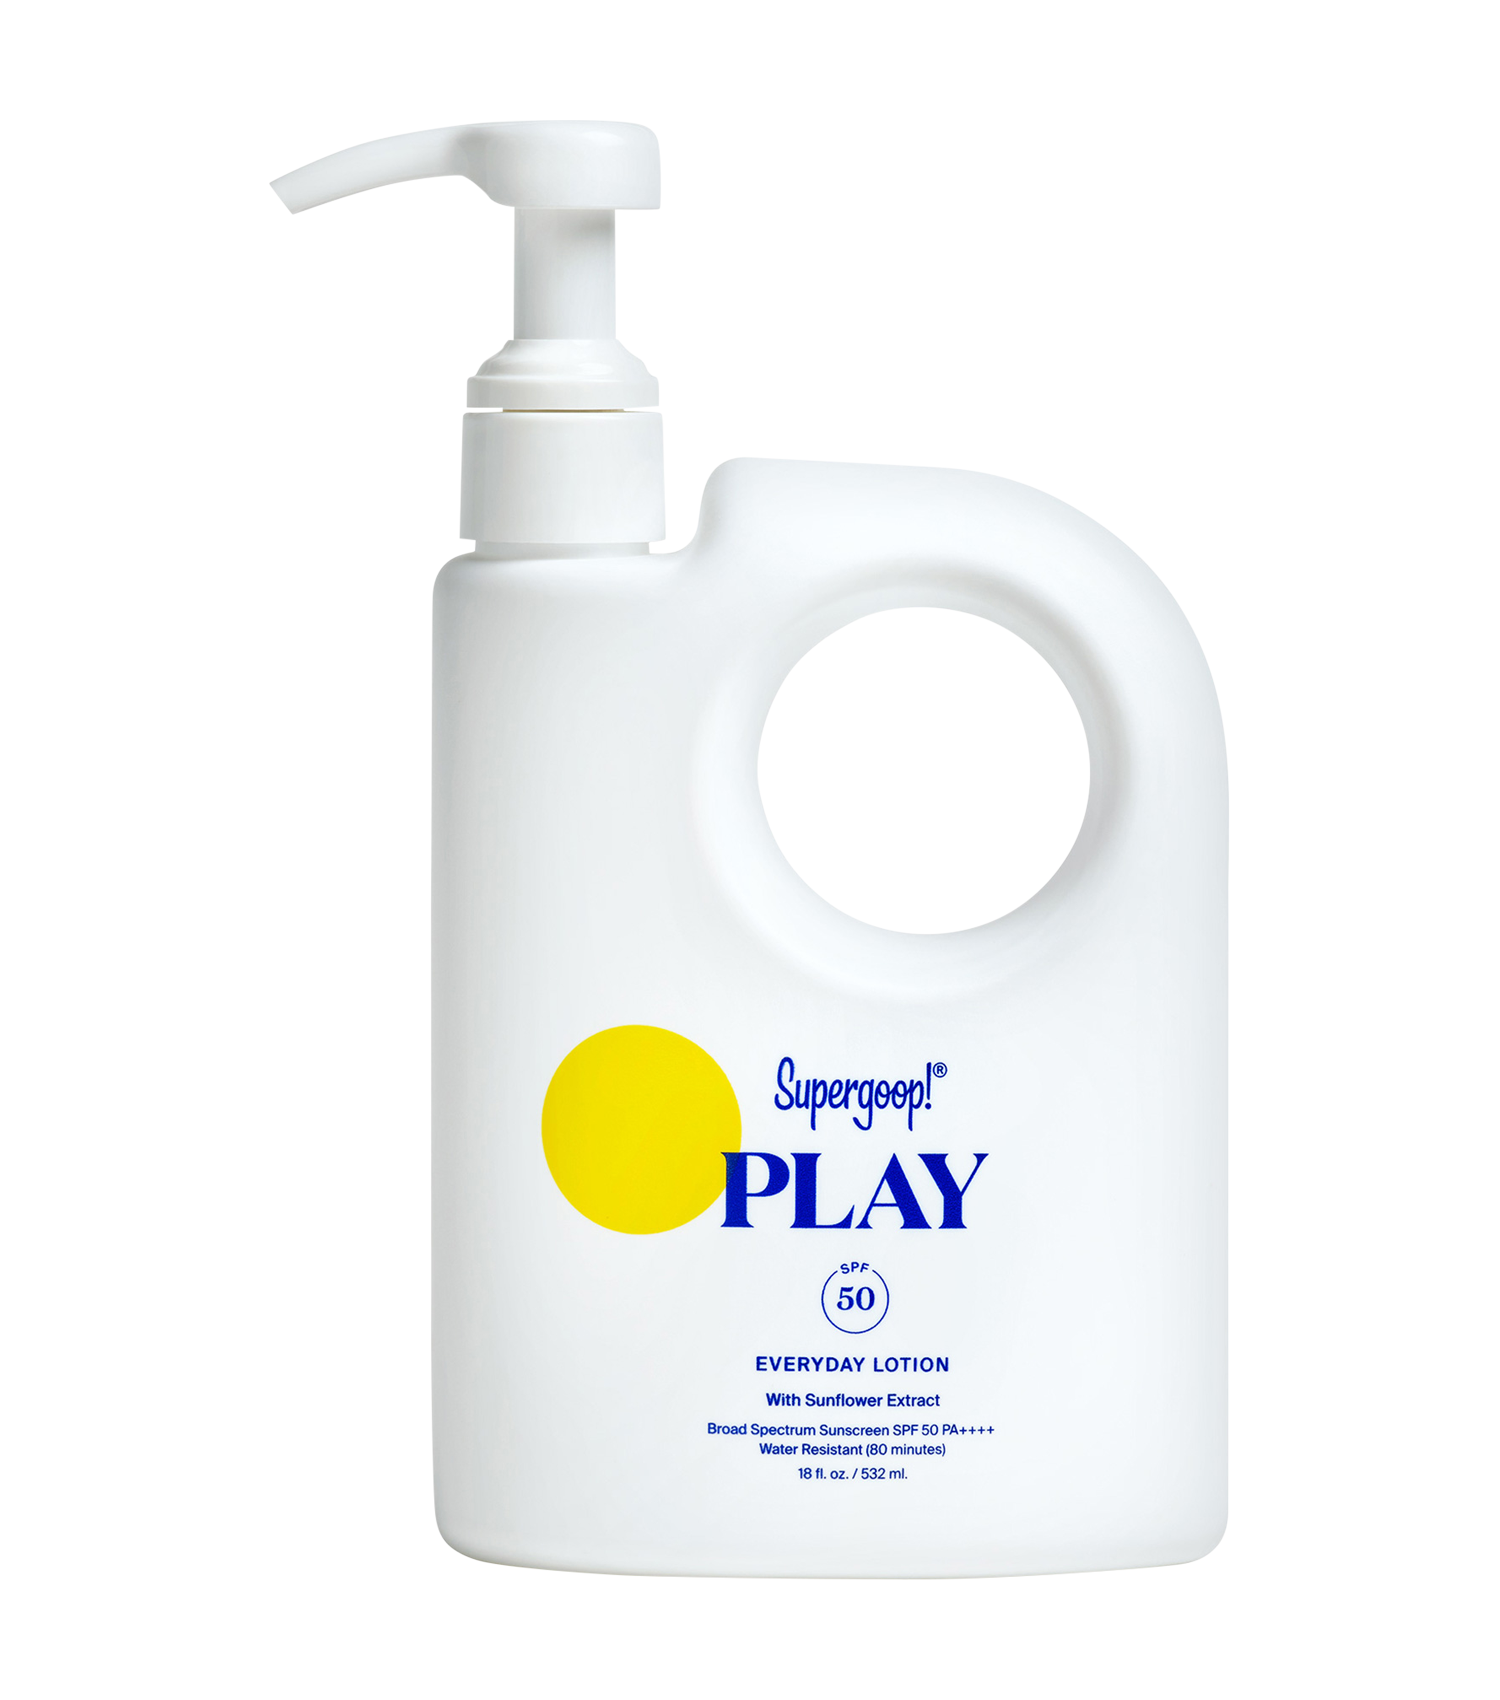 Supergoop! PLAY Everyday Lotion SPF 50 with Sunflower Extract - 18 oz. Supergoop! PLAY Everyday Lotion SPF 50 with Sunflower Extract - 18 oz. 1